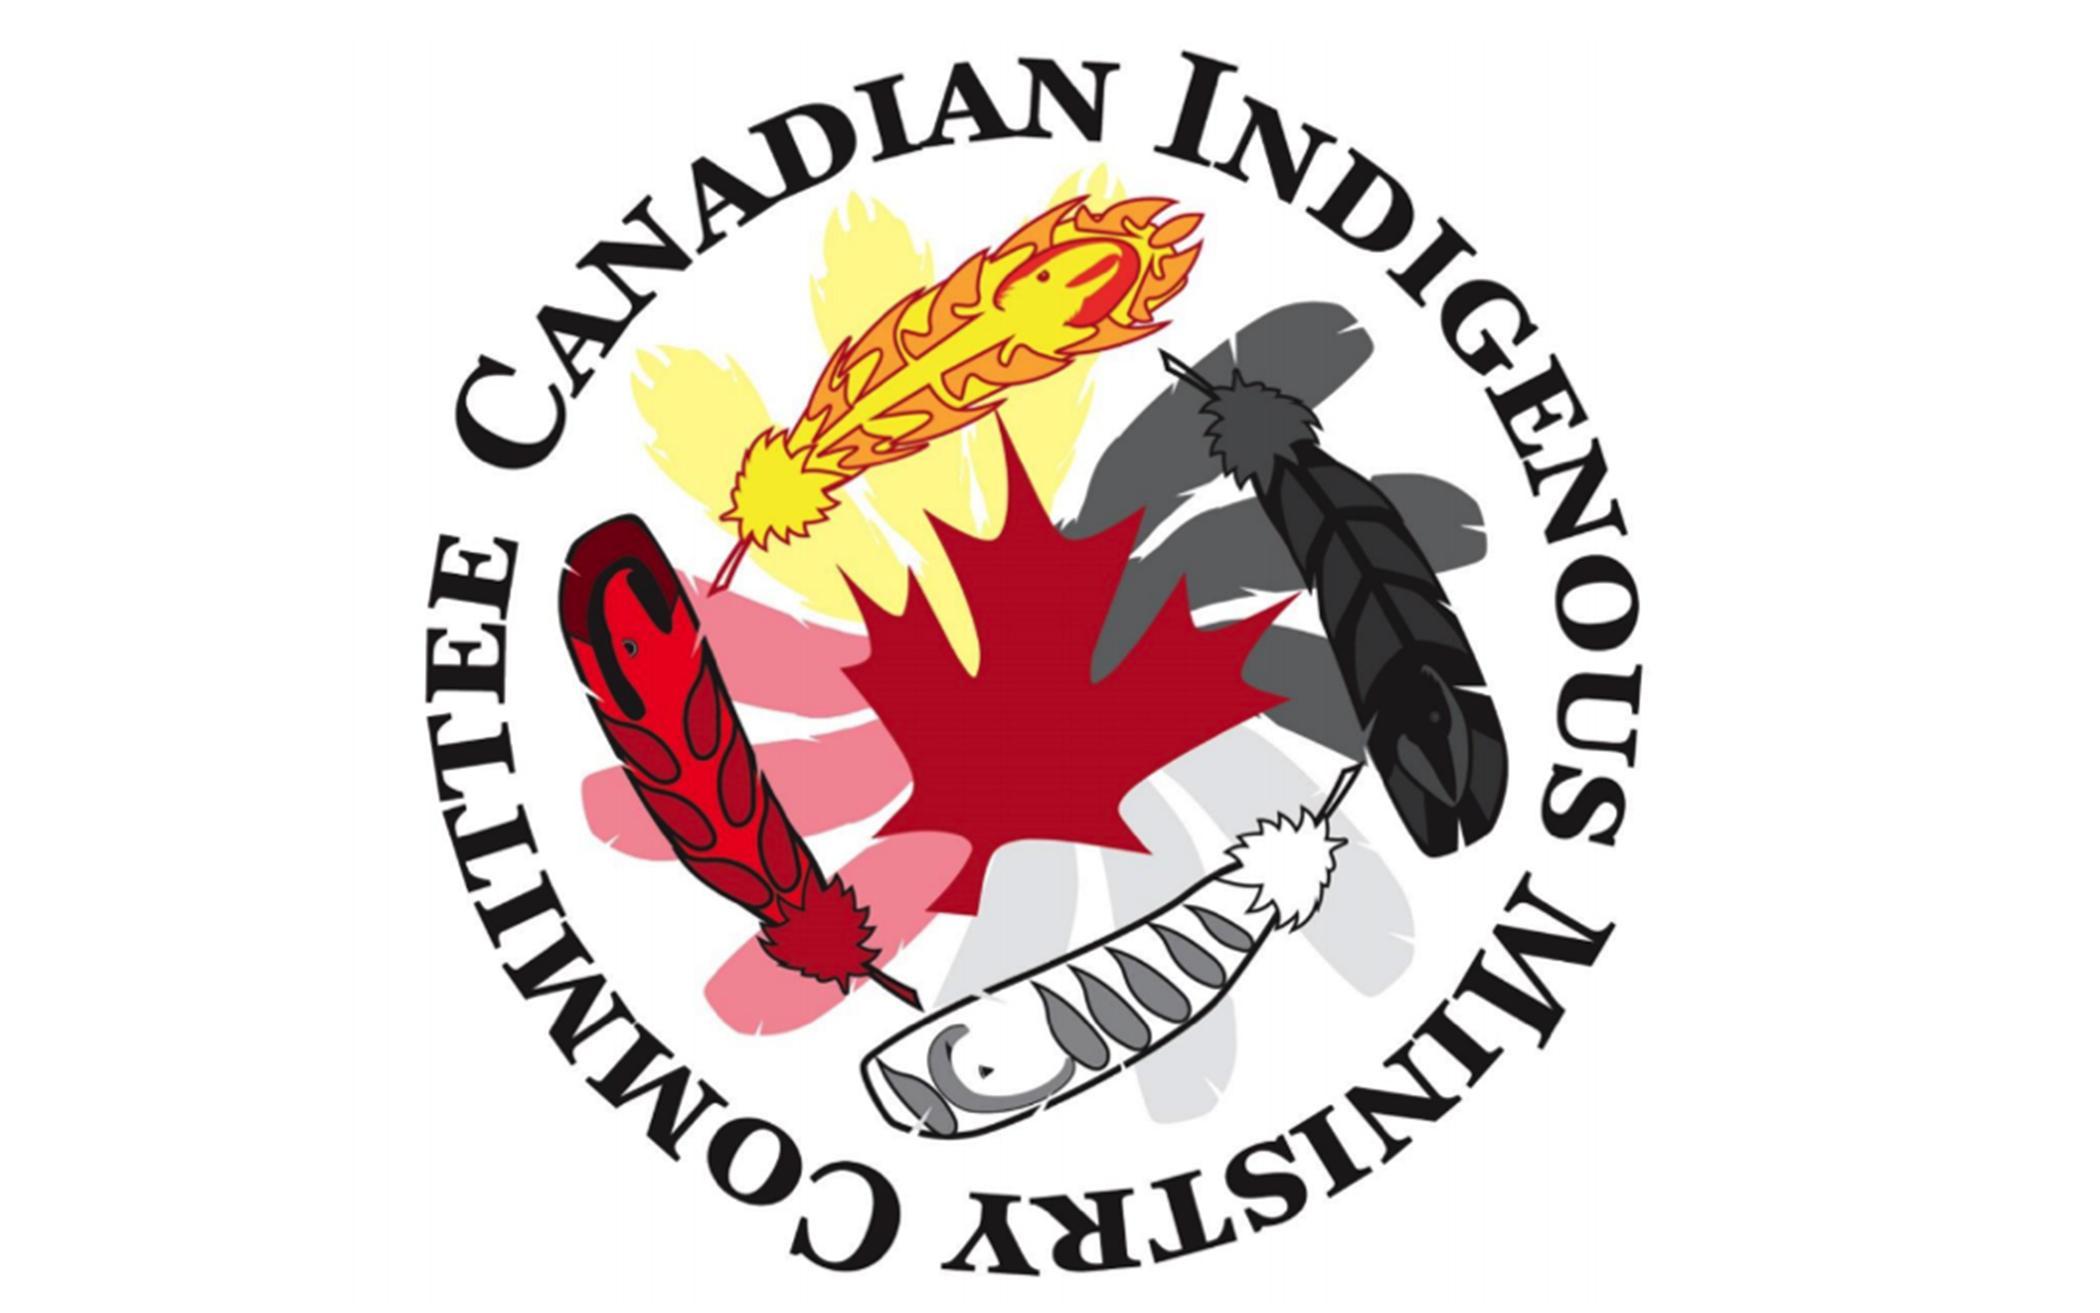 Proposal for Canadian Indigenous-Settler Reconciliation Process Approved